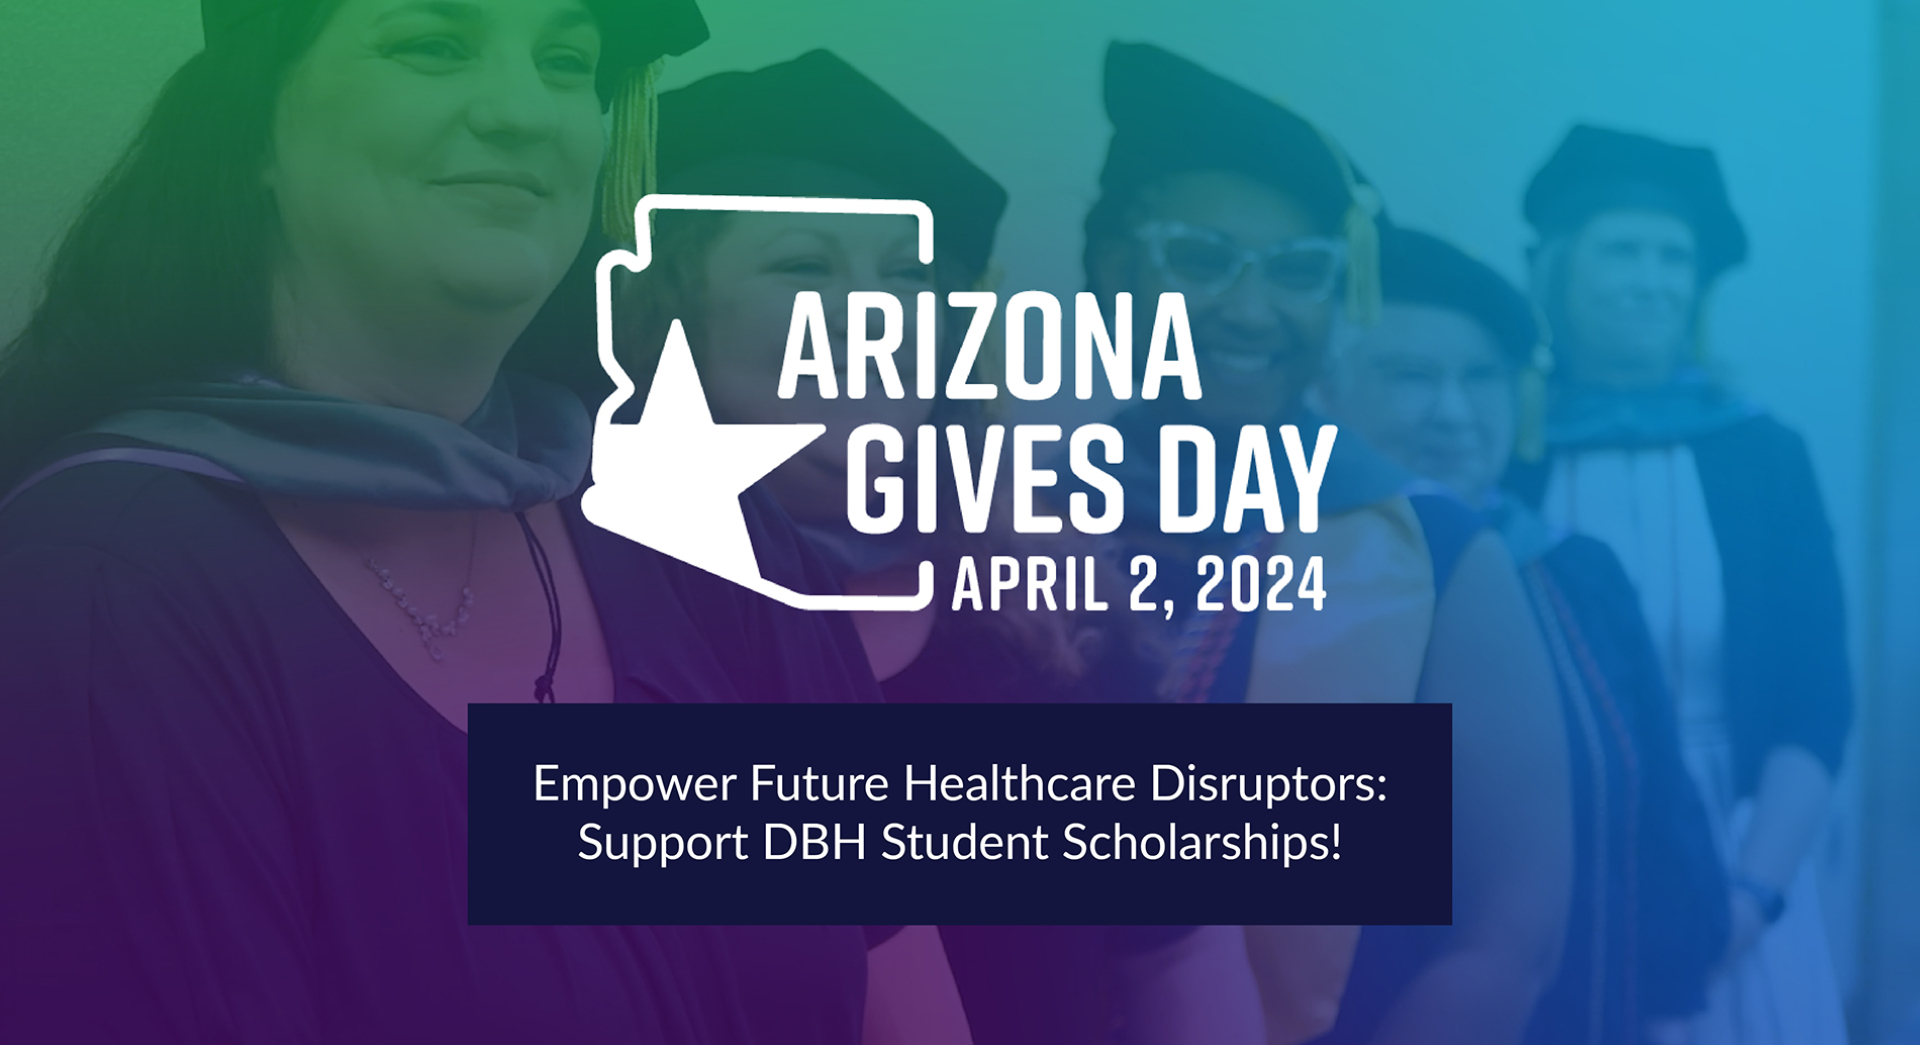 Arizona Gives Day April 2, 2024 - Empower Future Healthcare Disruptors: Support DBH Student Scholarships